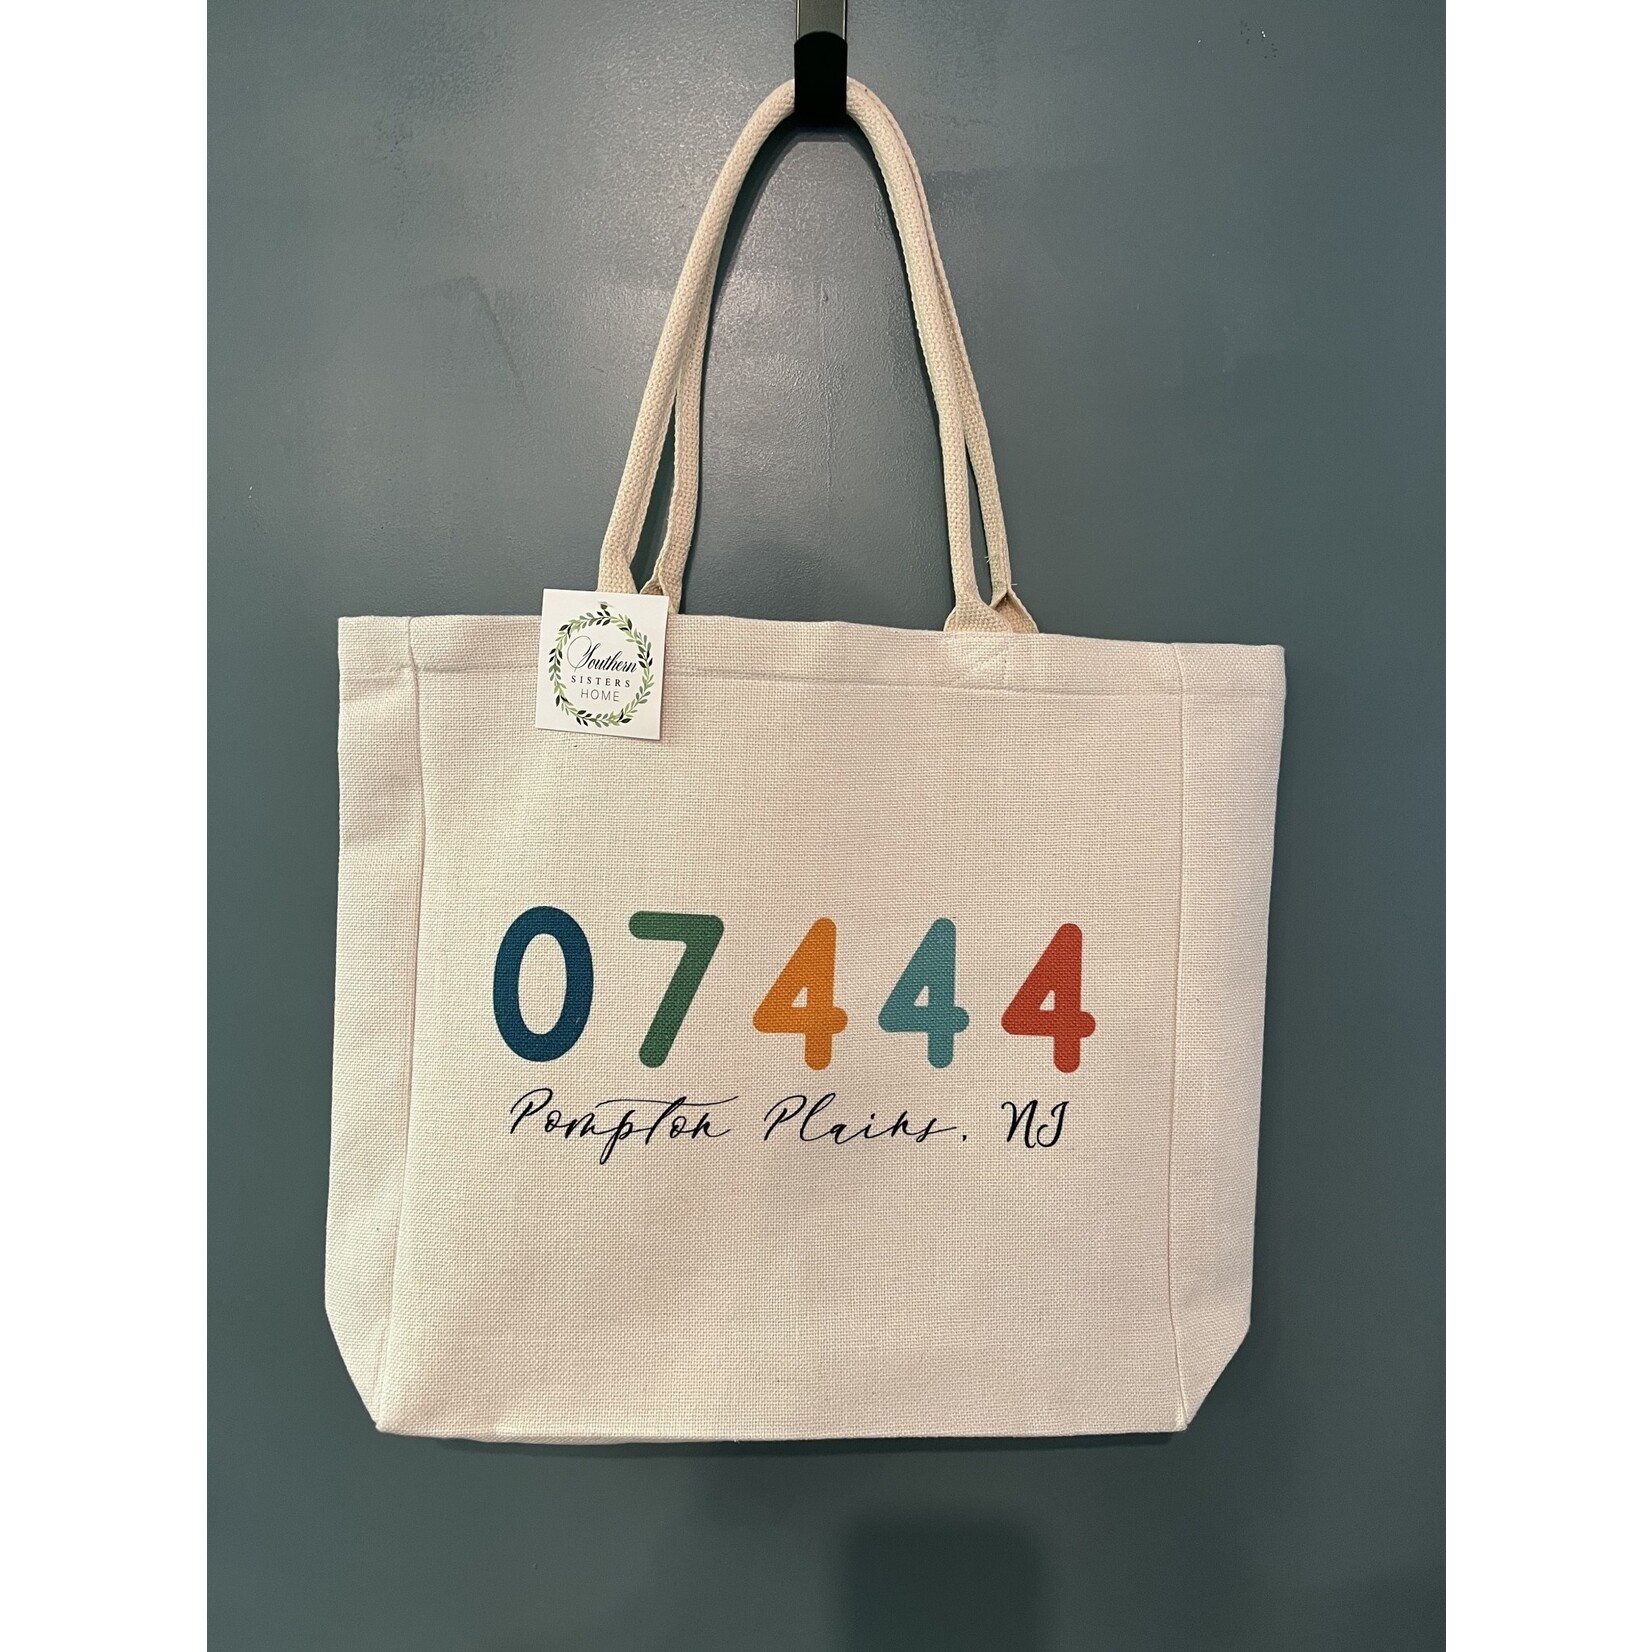 07444 Tote or Project Bag